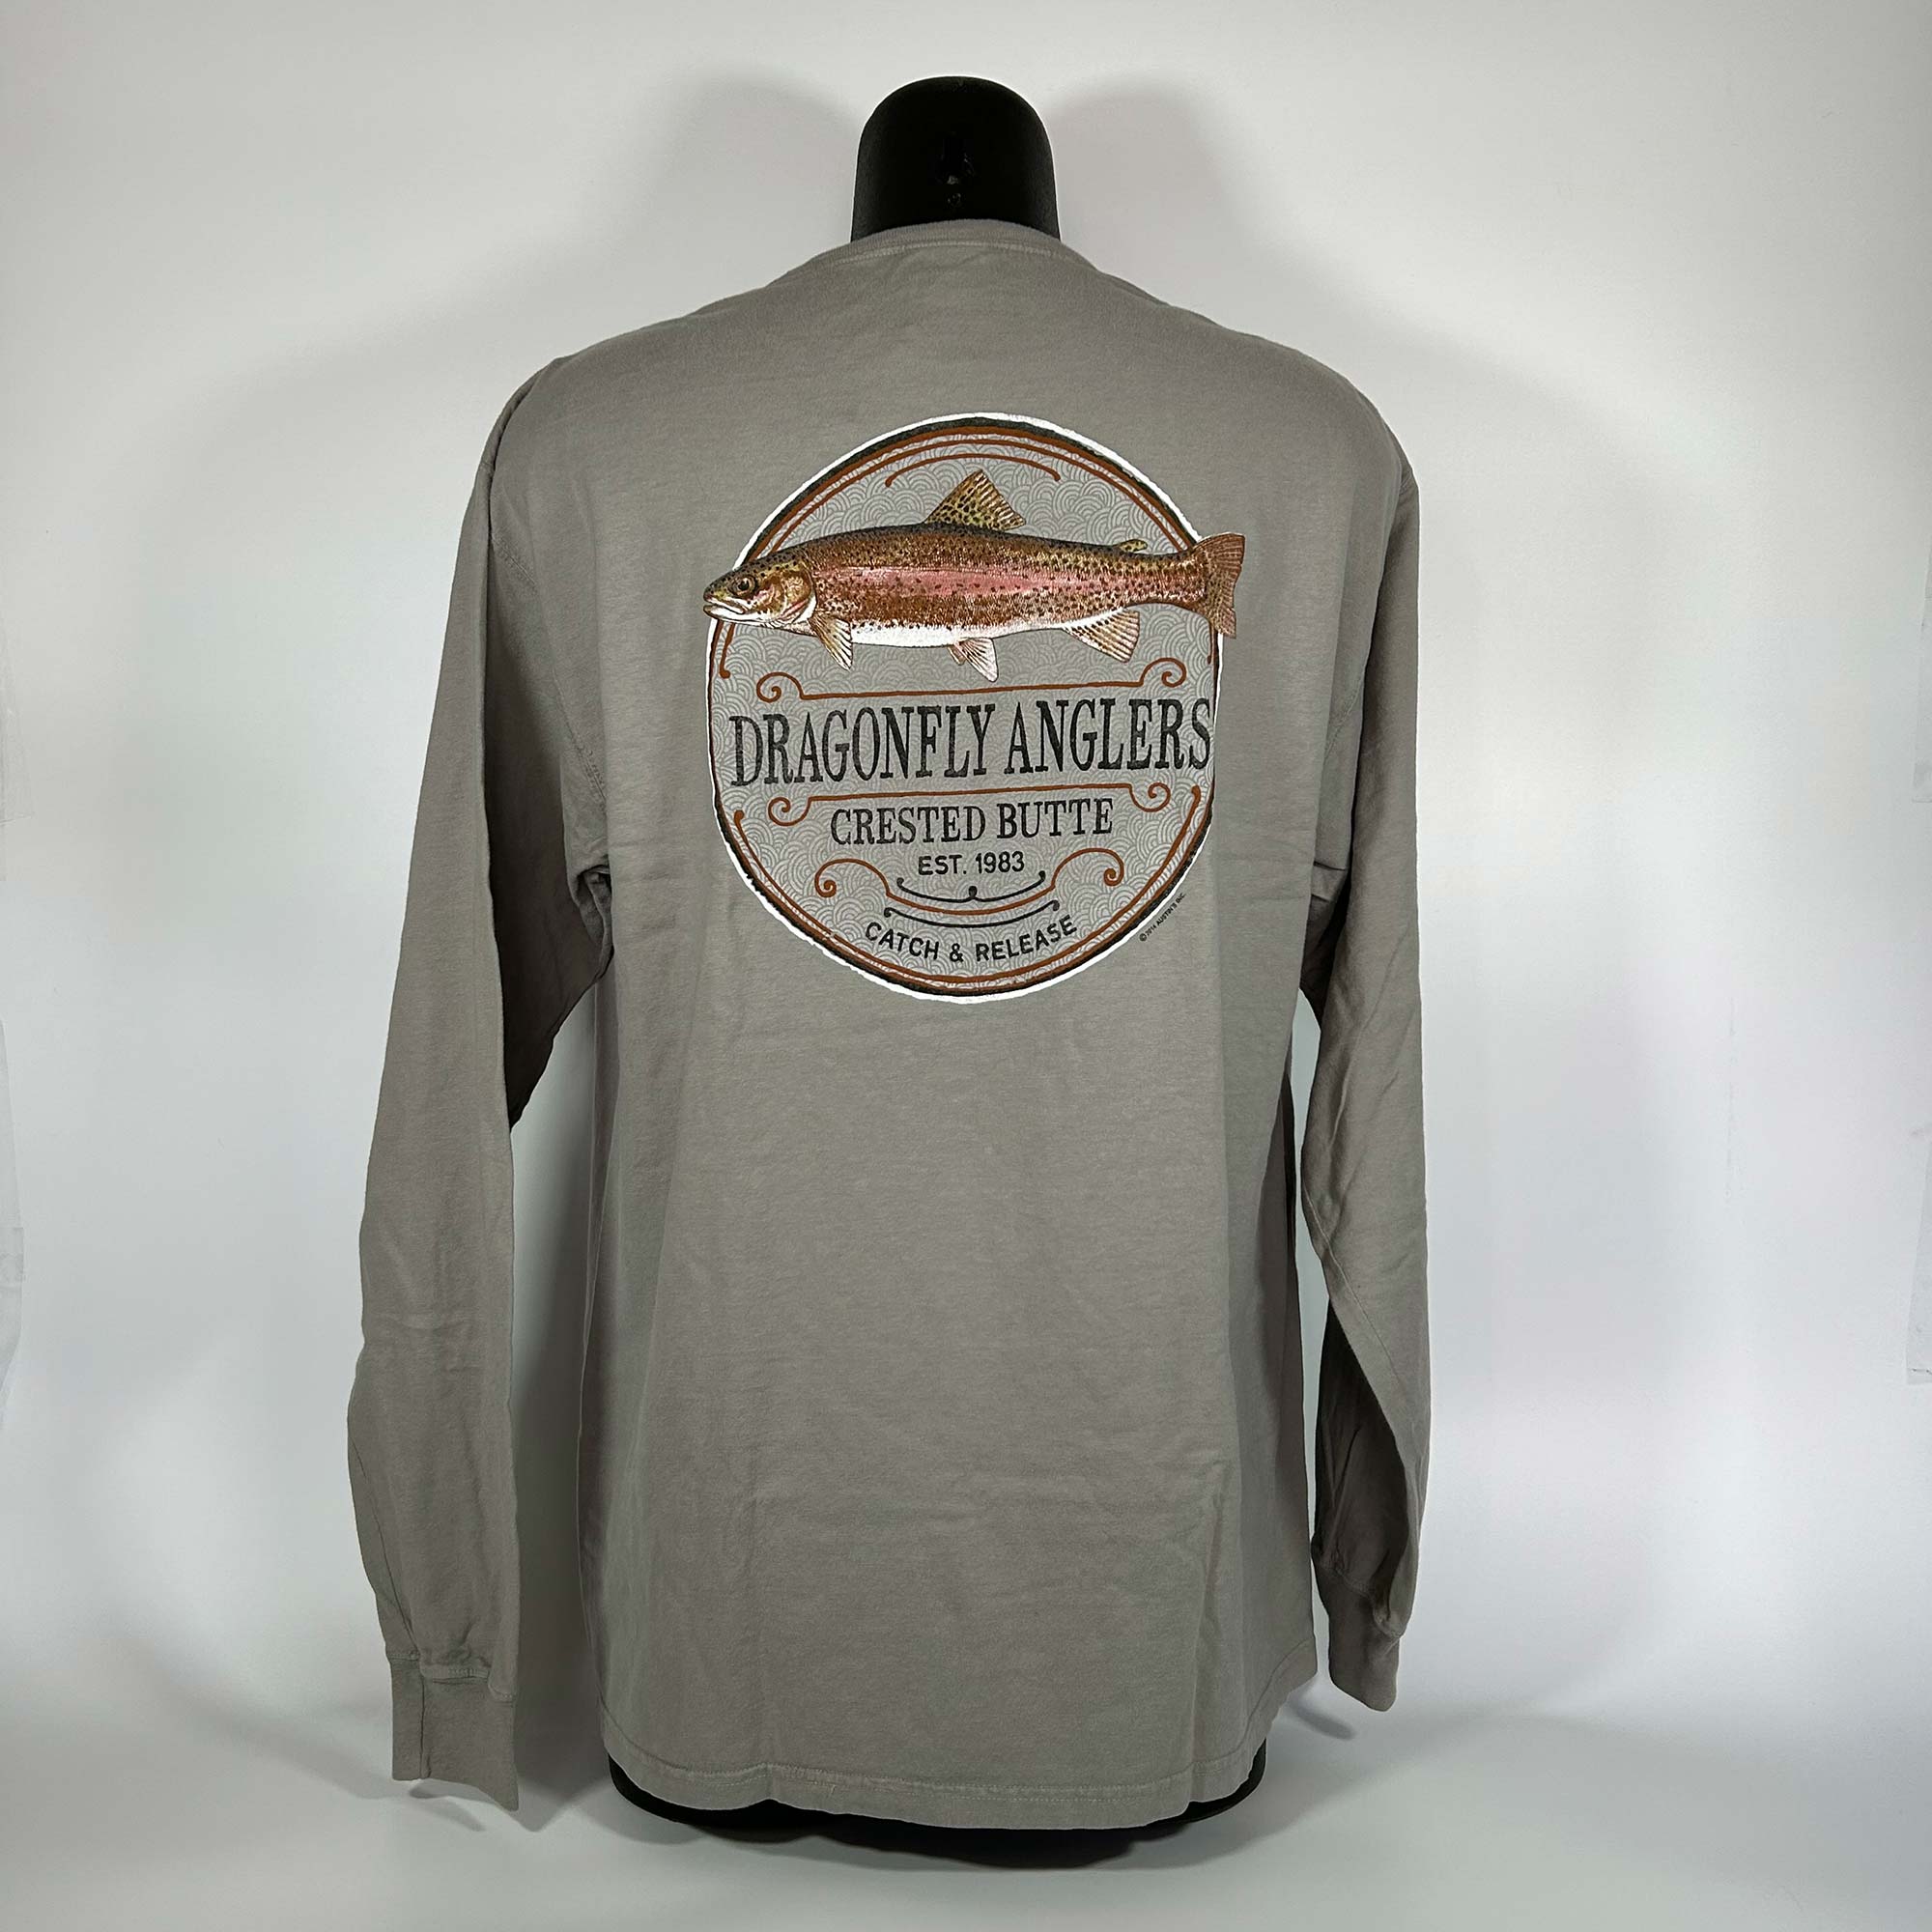 Dragonfly Anglers Rainbow Trout T-Shirt-Long Sleeve - Dragonfly Anglers